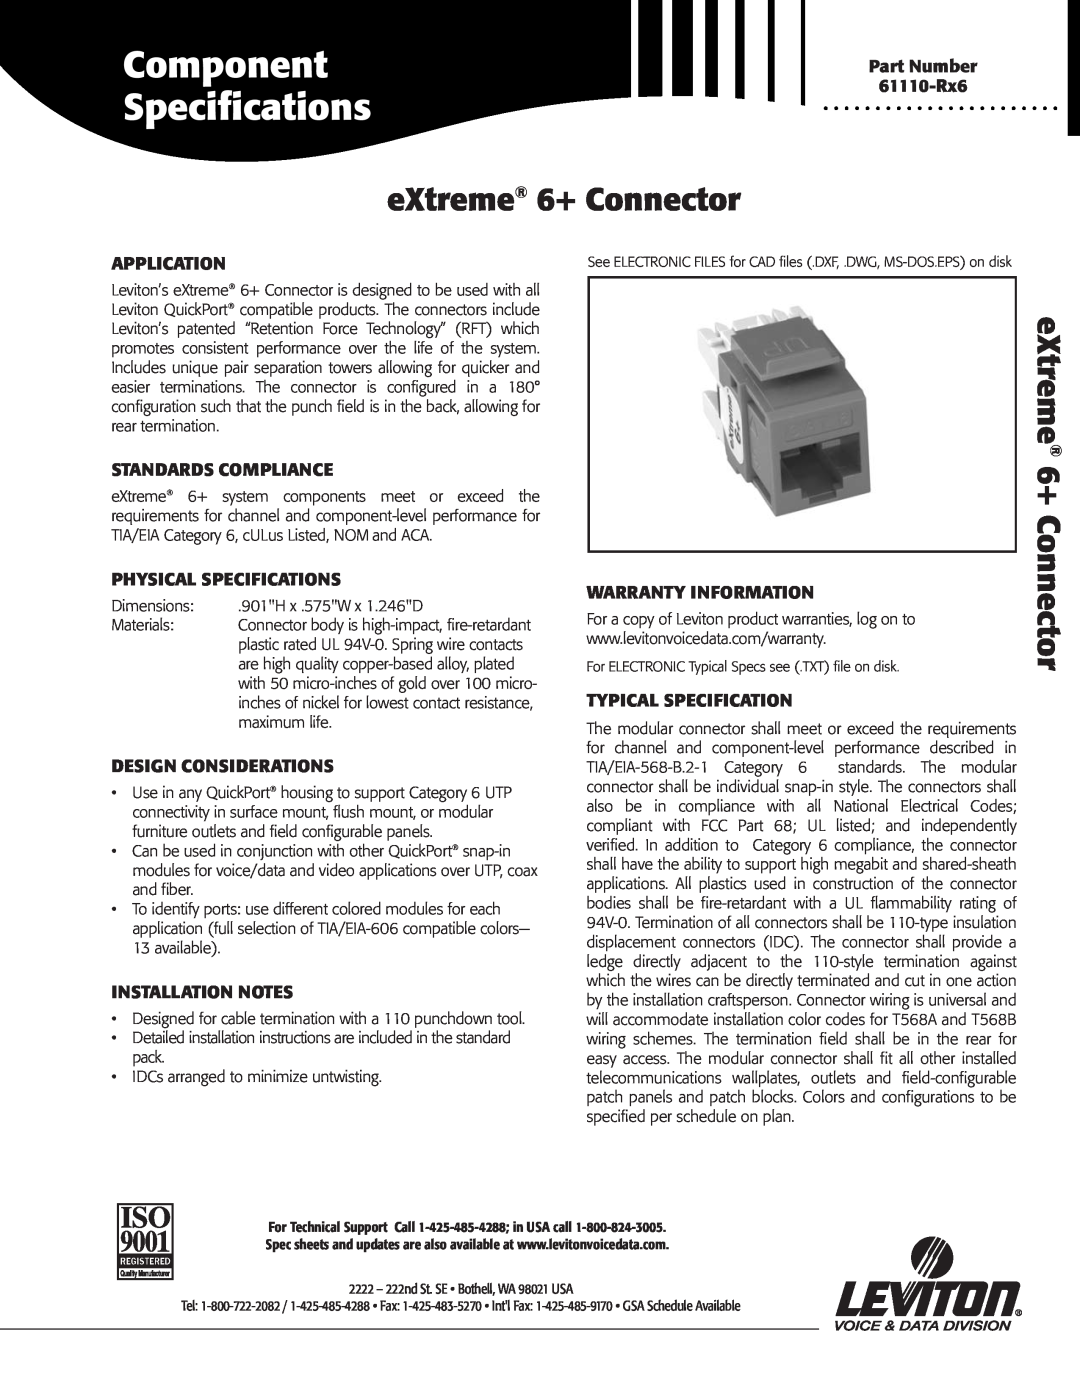 Leviton 61110-Rx6 warranty eXtreme 6+ Connector, Application, Standards Compliance, Physical Specifications, Component 